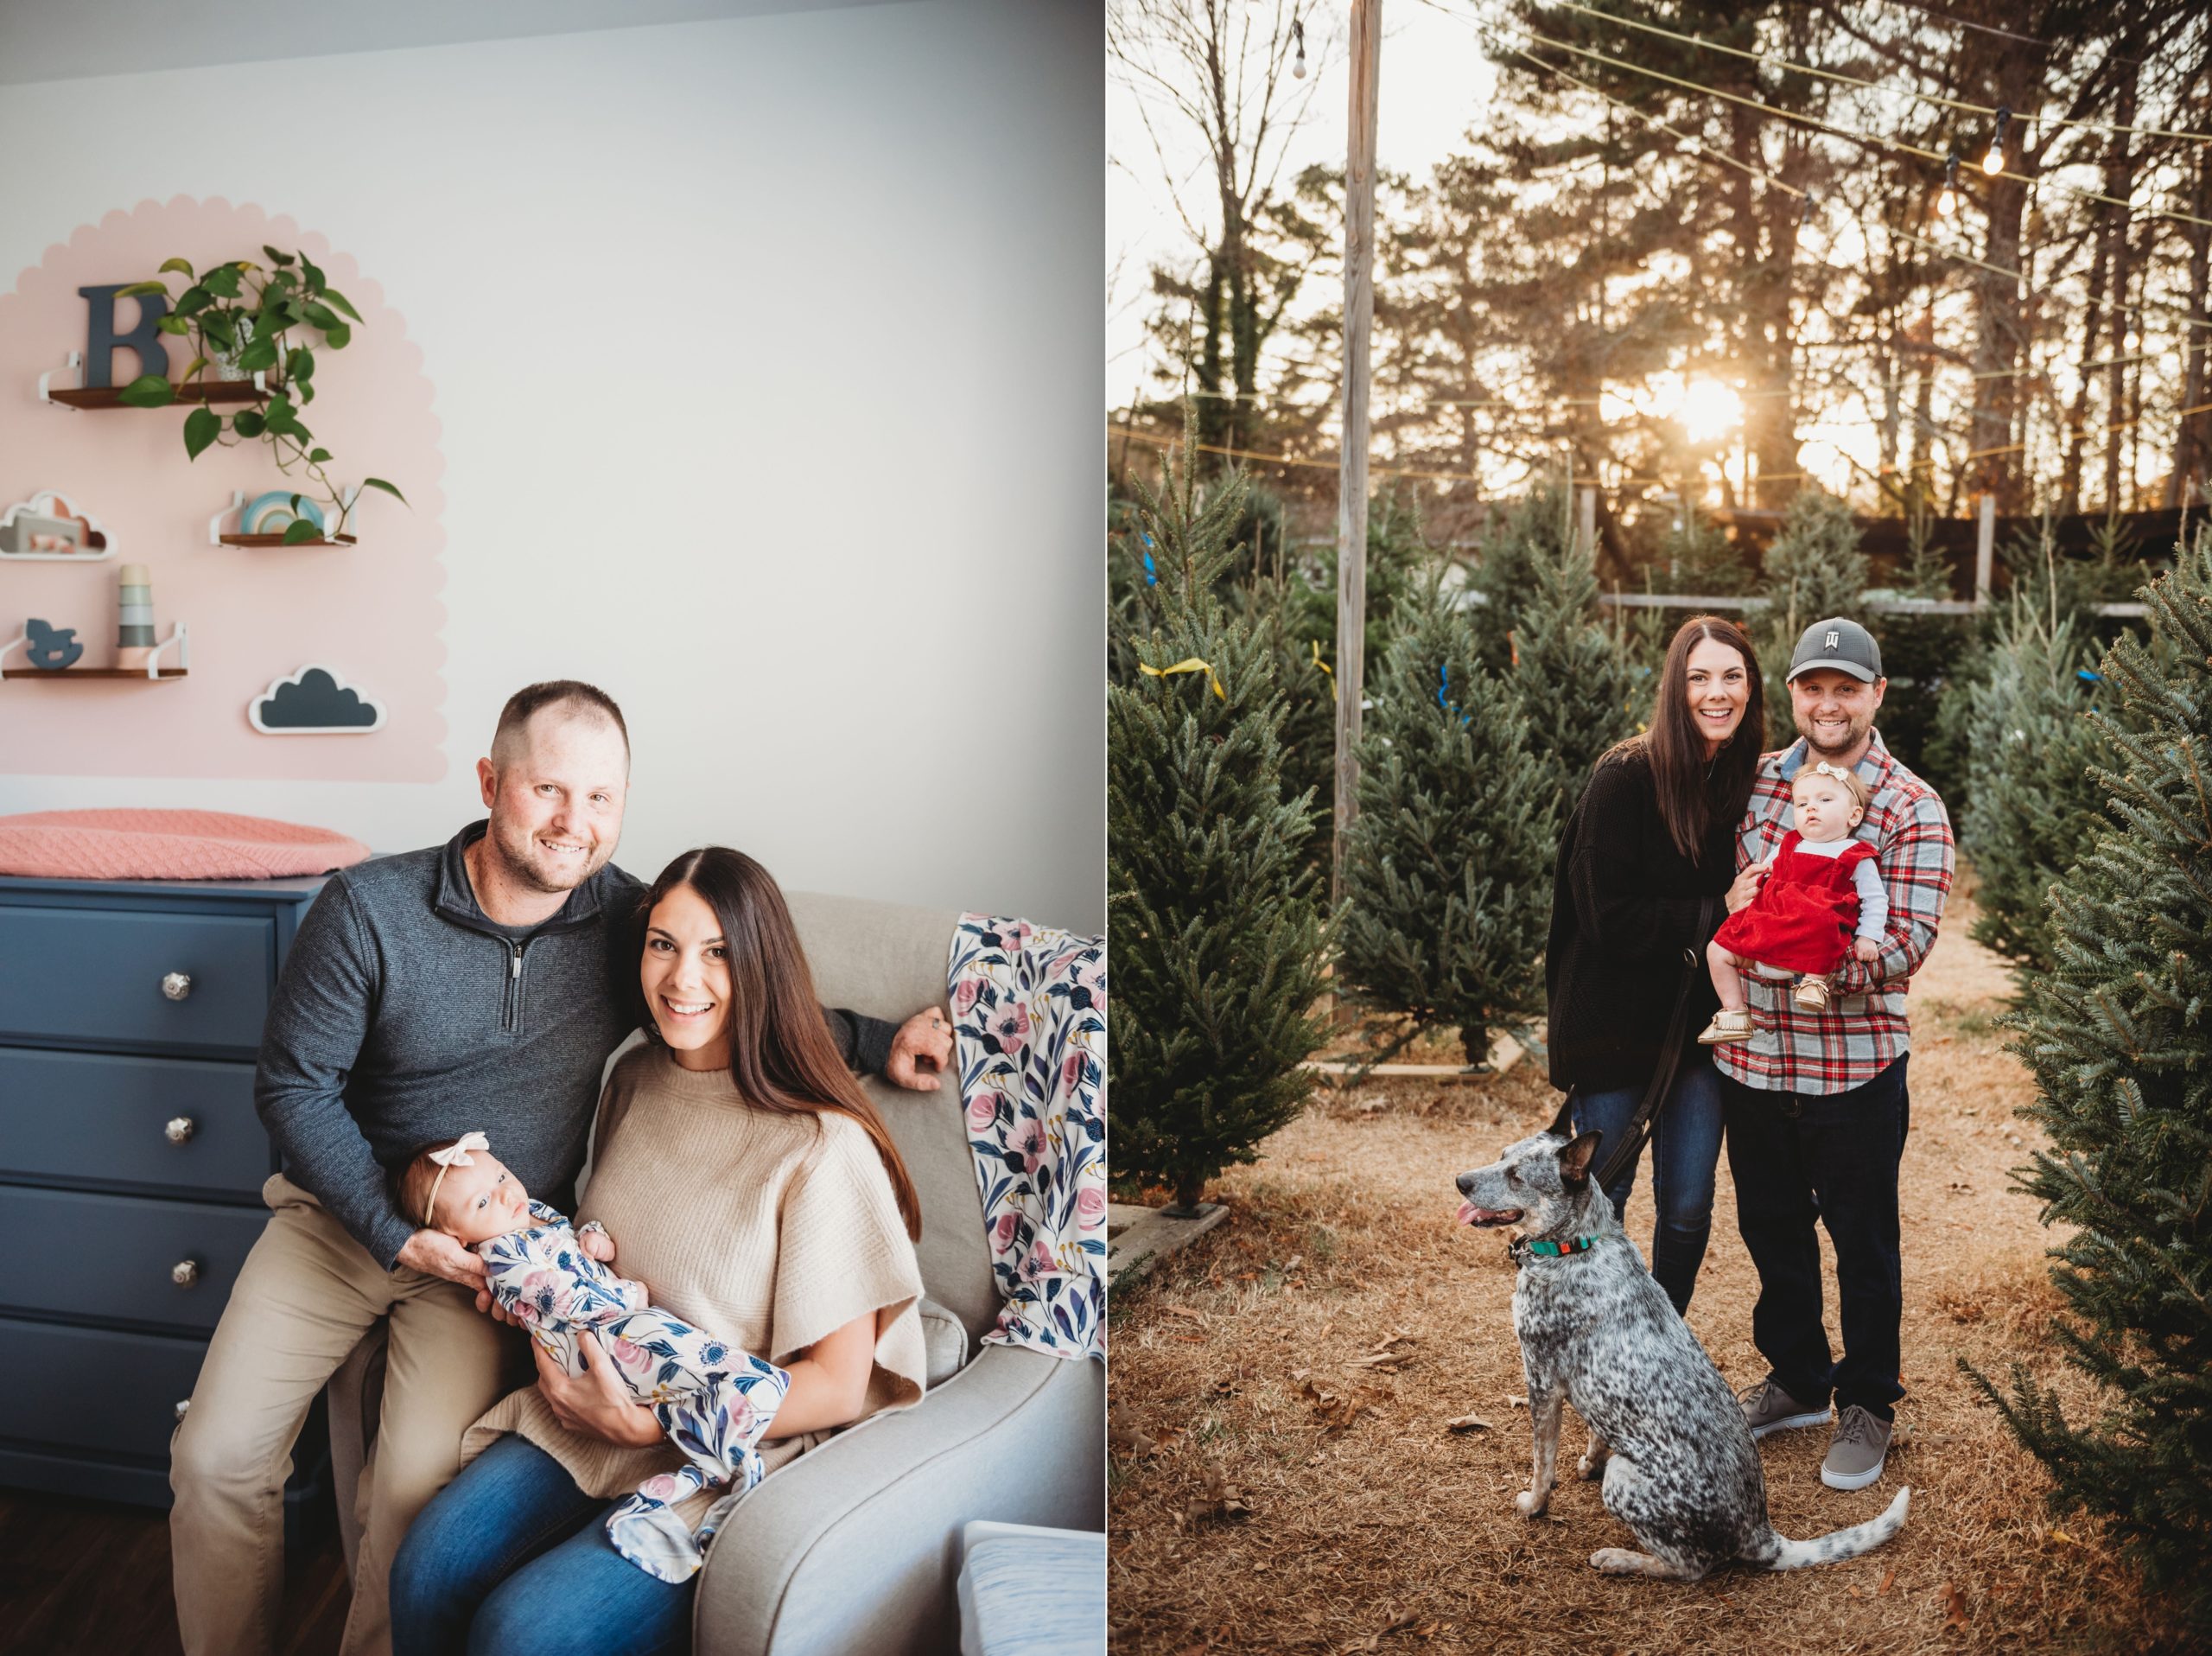 Meet Jessie! She's one of our Raleigh, NC associates. We're excited to share her story with you! Click to read more about her photography journey live on the blog now! 